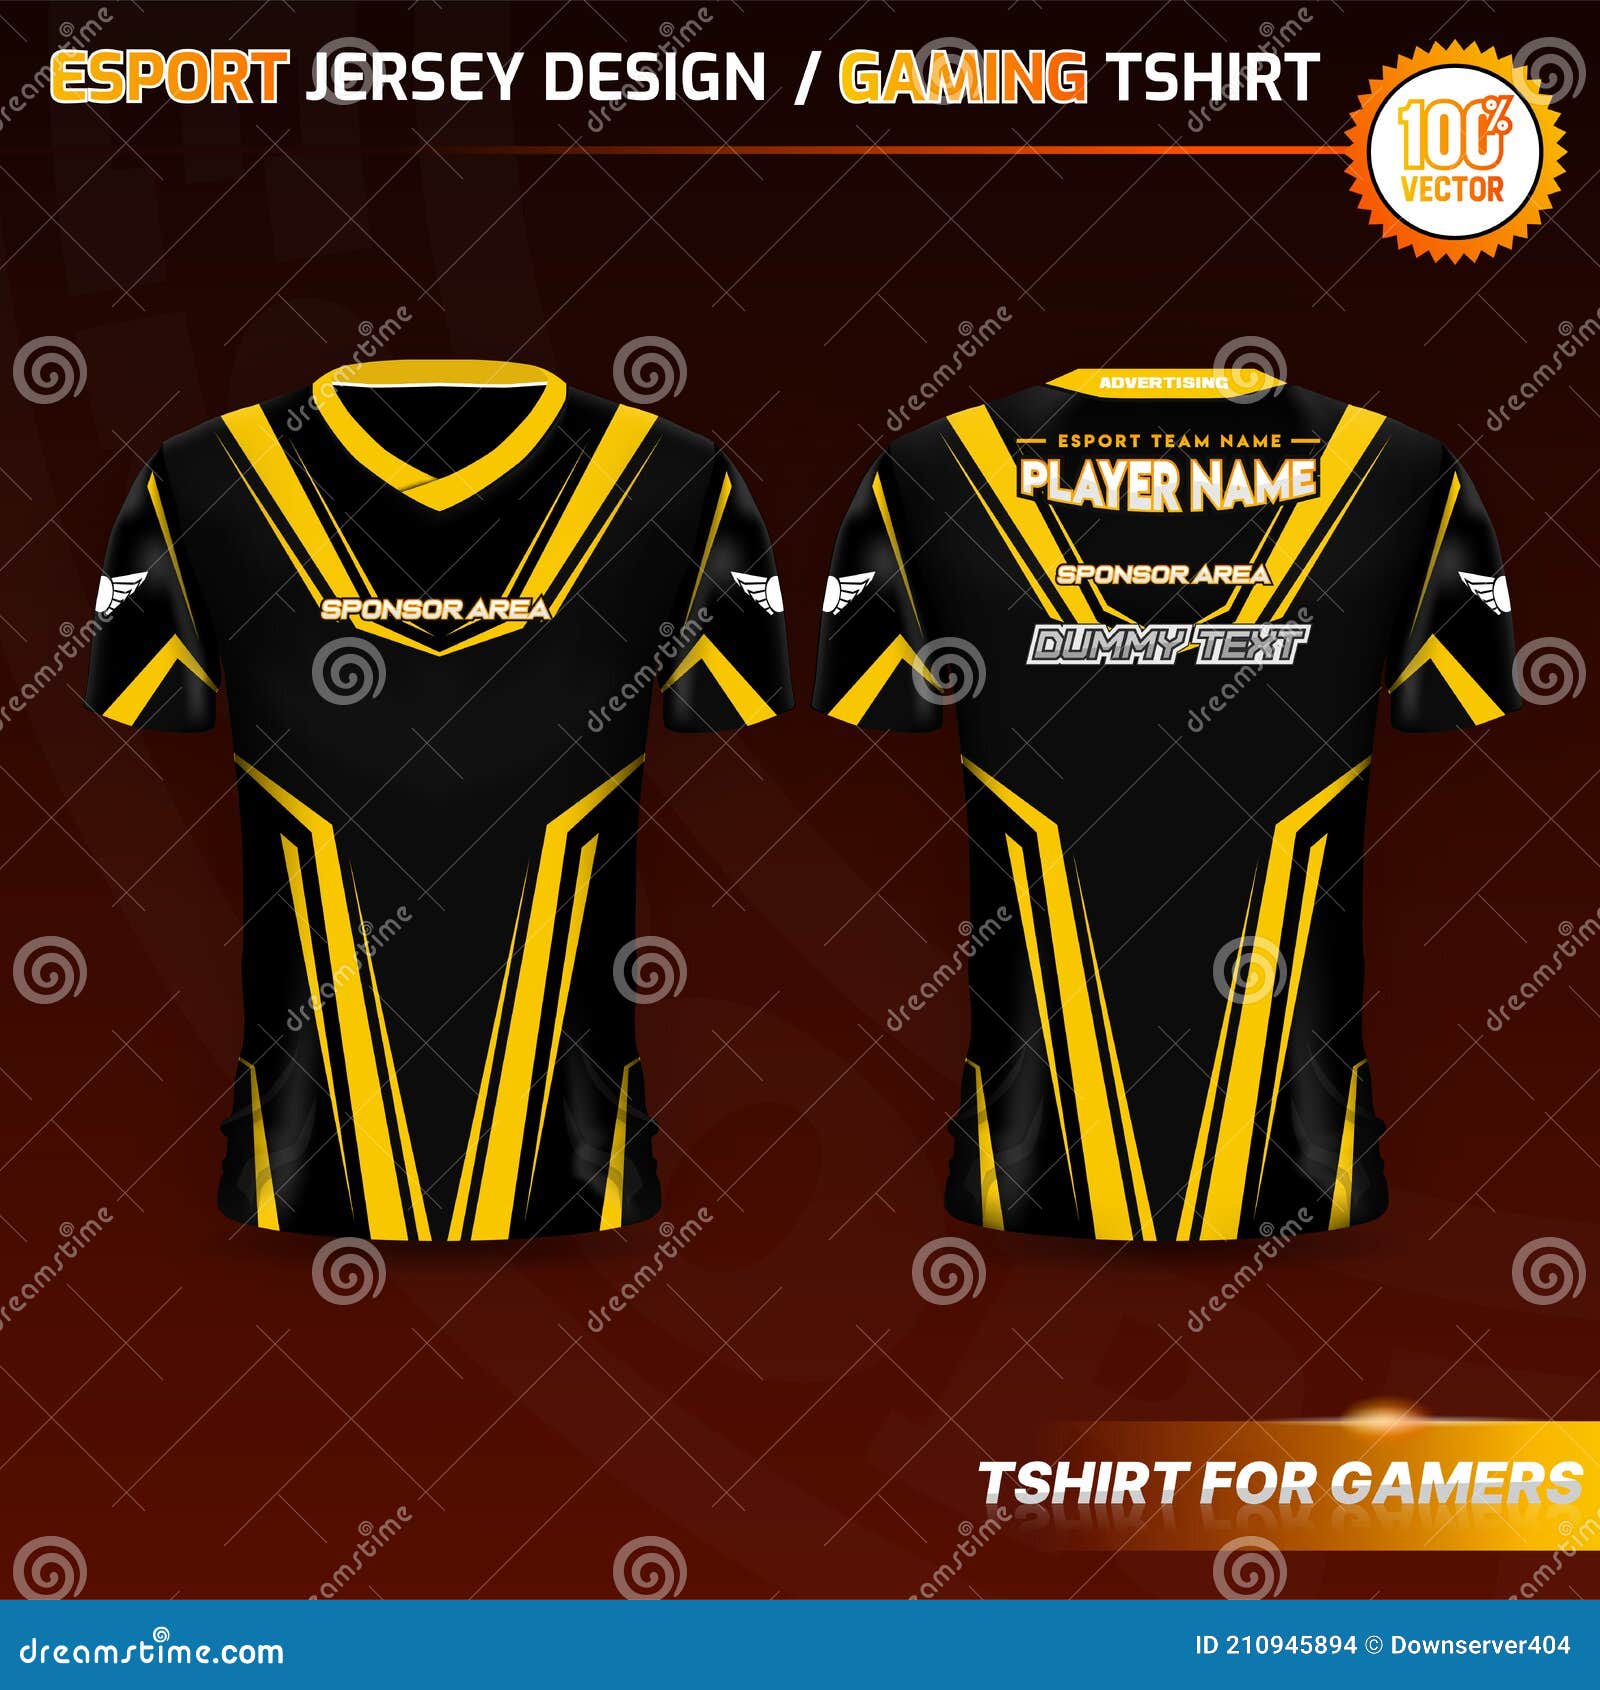 Team Jersey Design Black Yellow Stock Vector Illustration and Royalty Free  Team Jersey Design Black Yellow Clipart